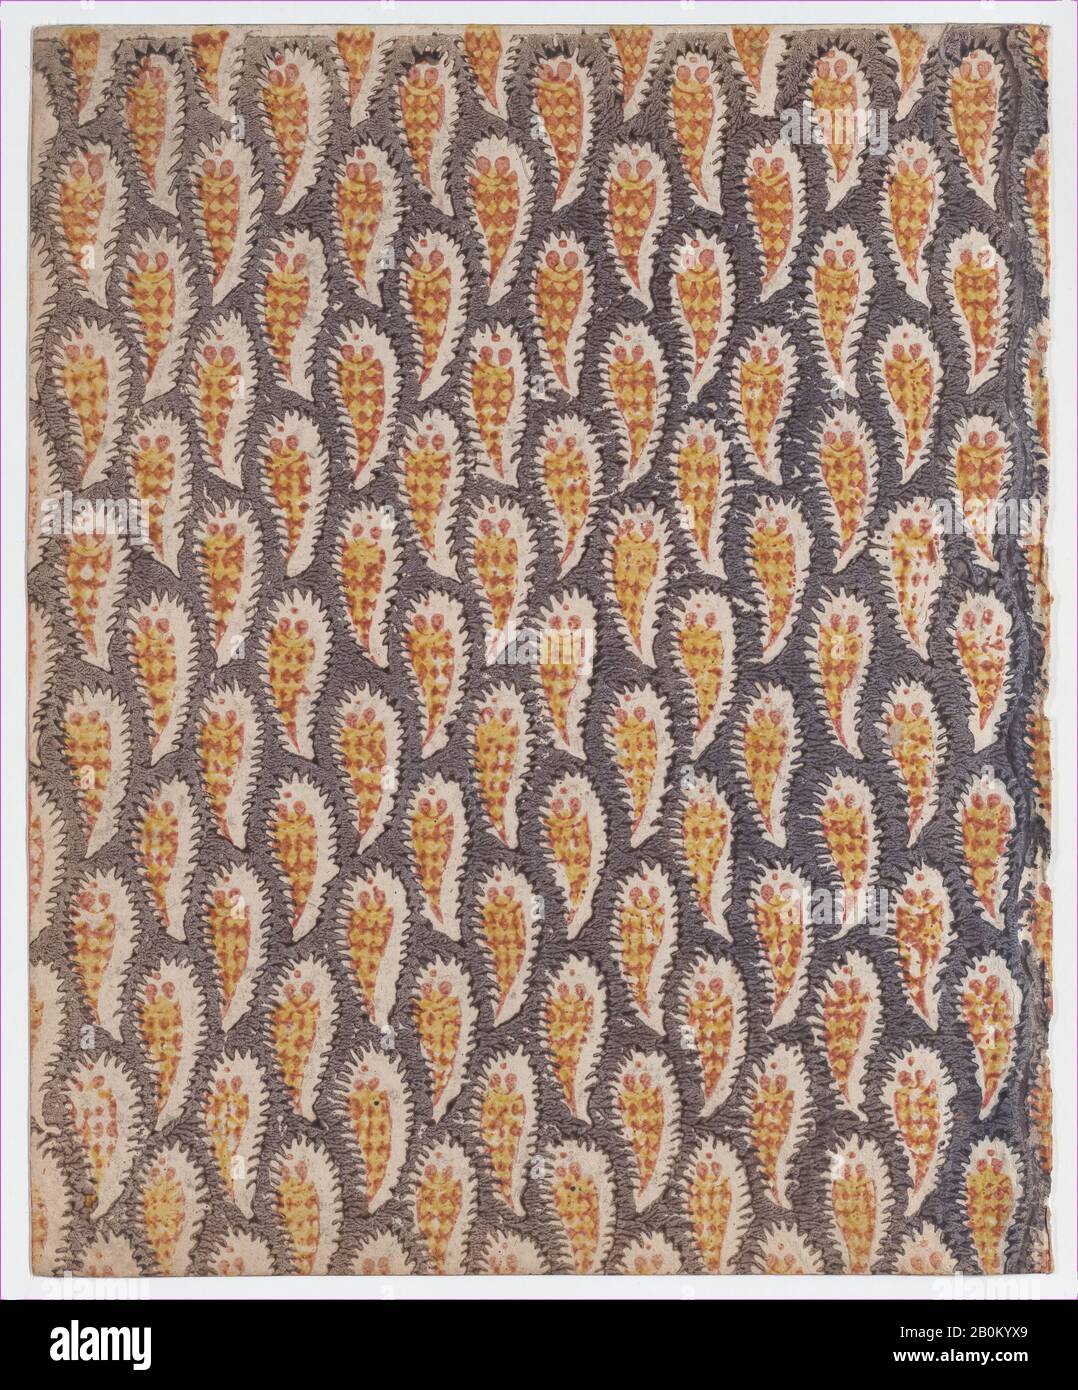 Anonymous, Sheet with overall paisley pattern, Anonymous, 19th century, 19th century, Relief print (wood or metal), Sheet: 10 3/16 × 8 1/4 in. (25.8 × 21 cm), Prints Stock Photo